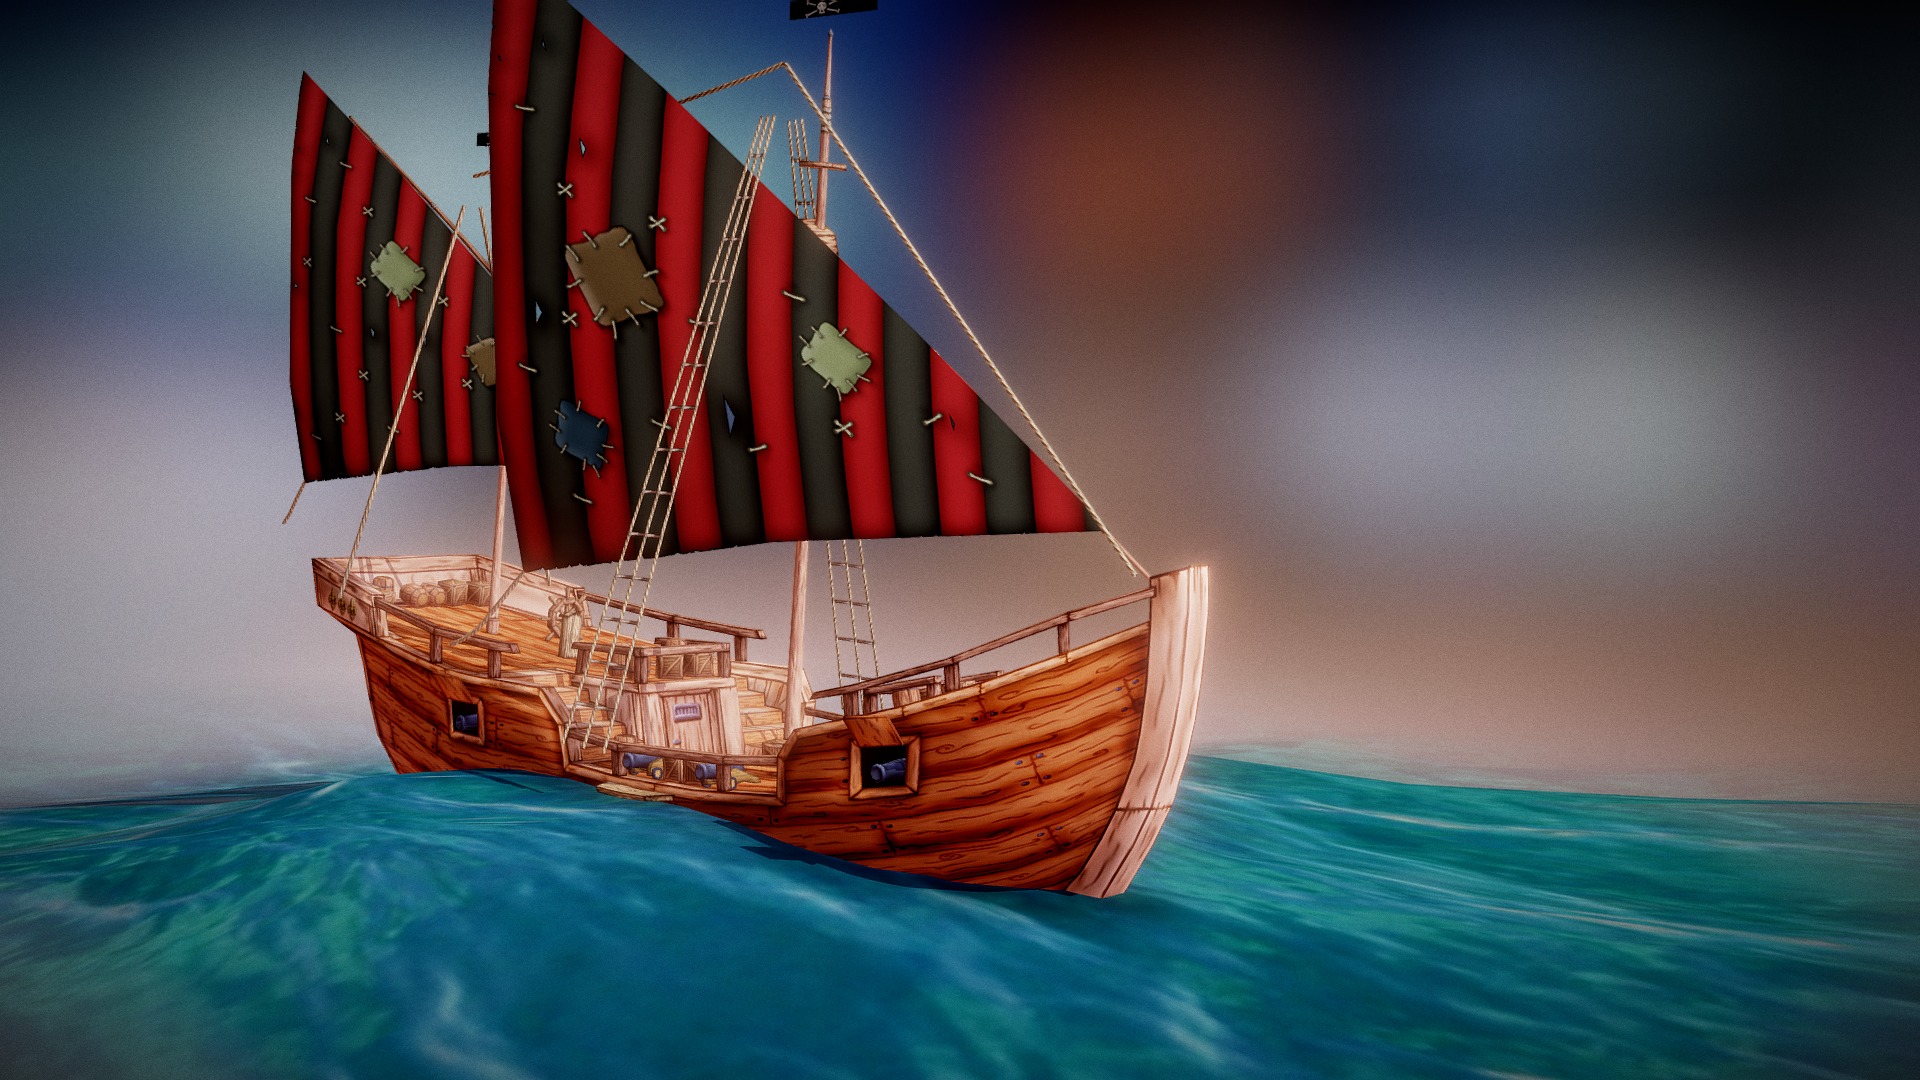 3D model Pirate Caravel "Sparrow" - This is a 3D model of the Pirate Caravel "Sparrow". The 3D model is about a ship in the water.